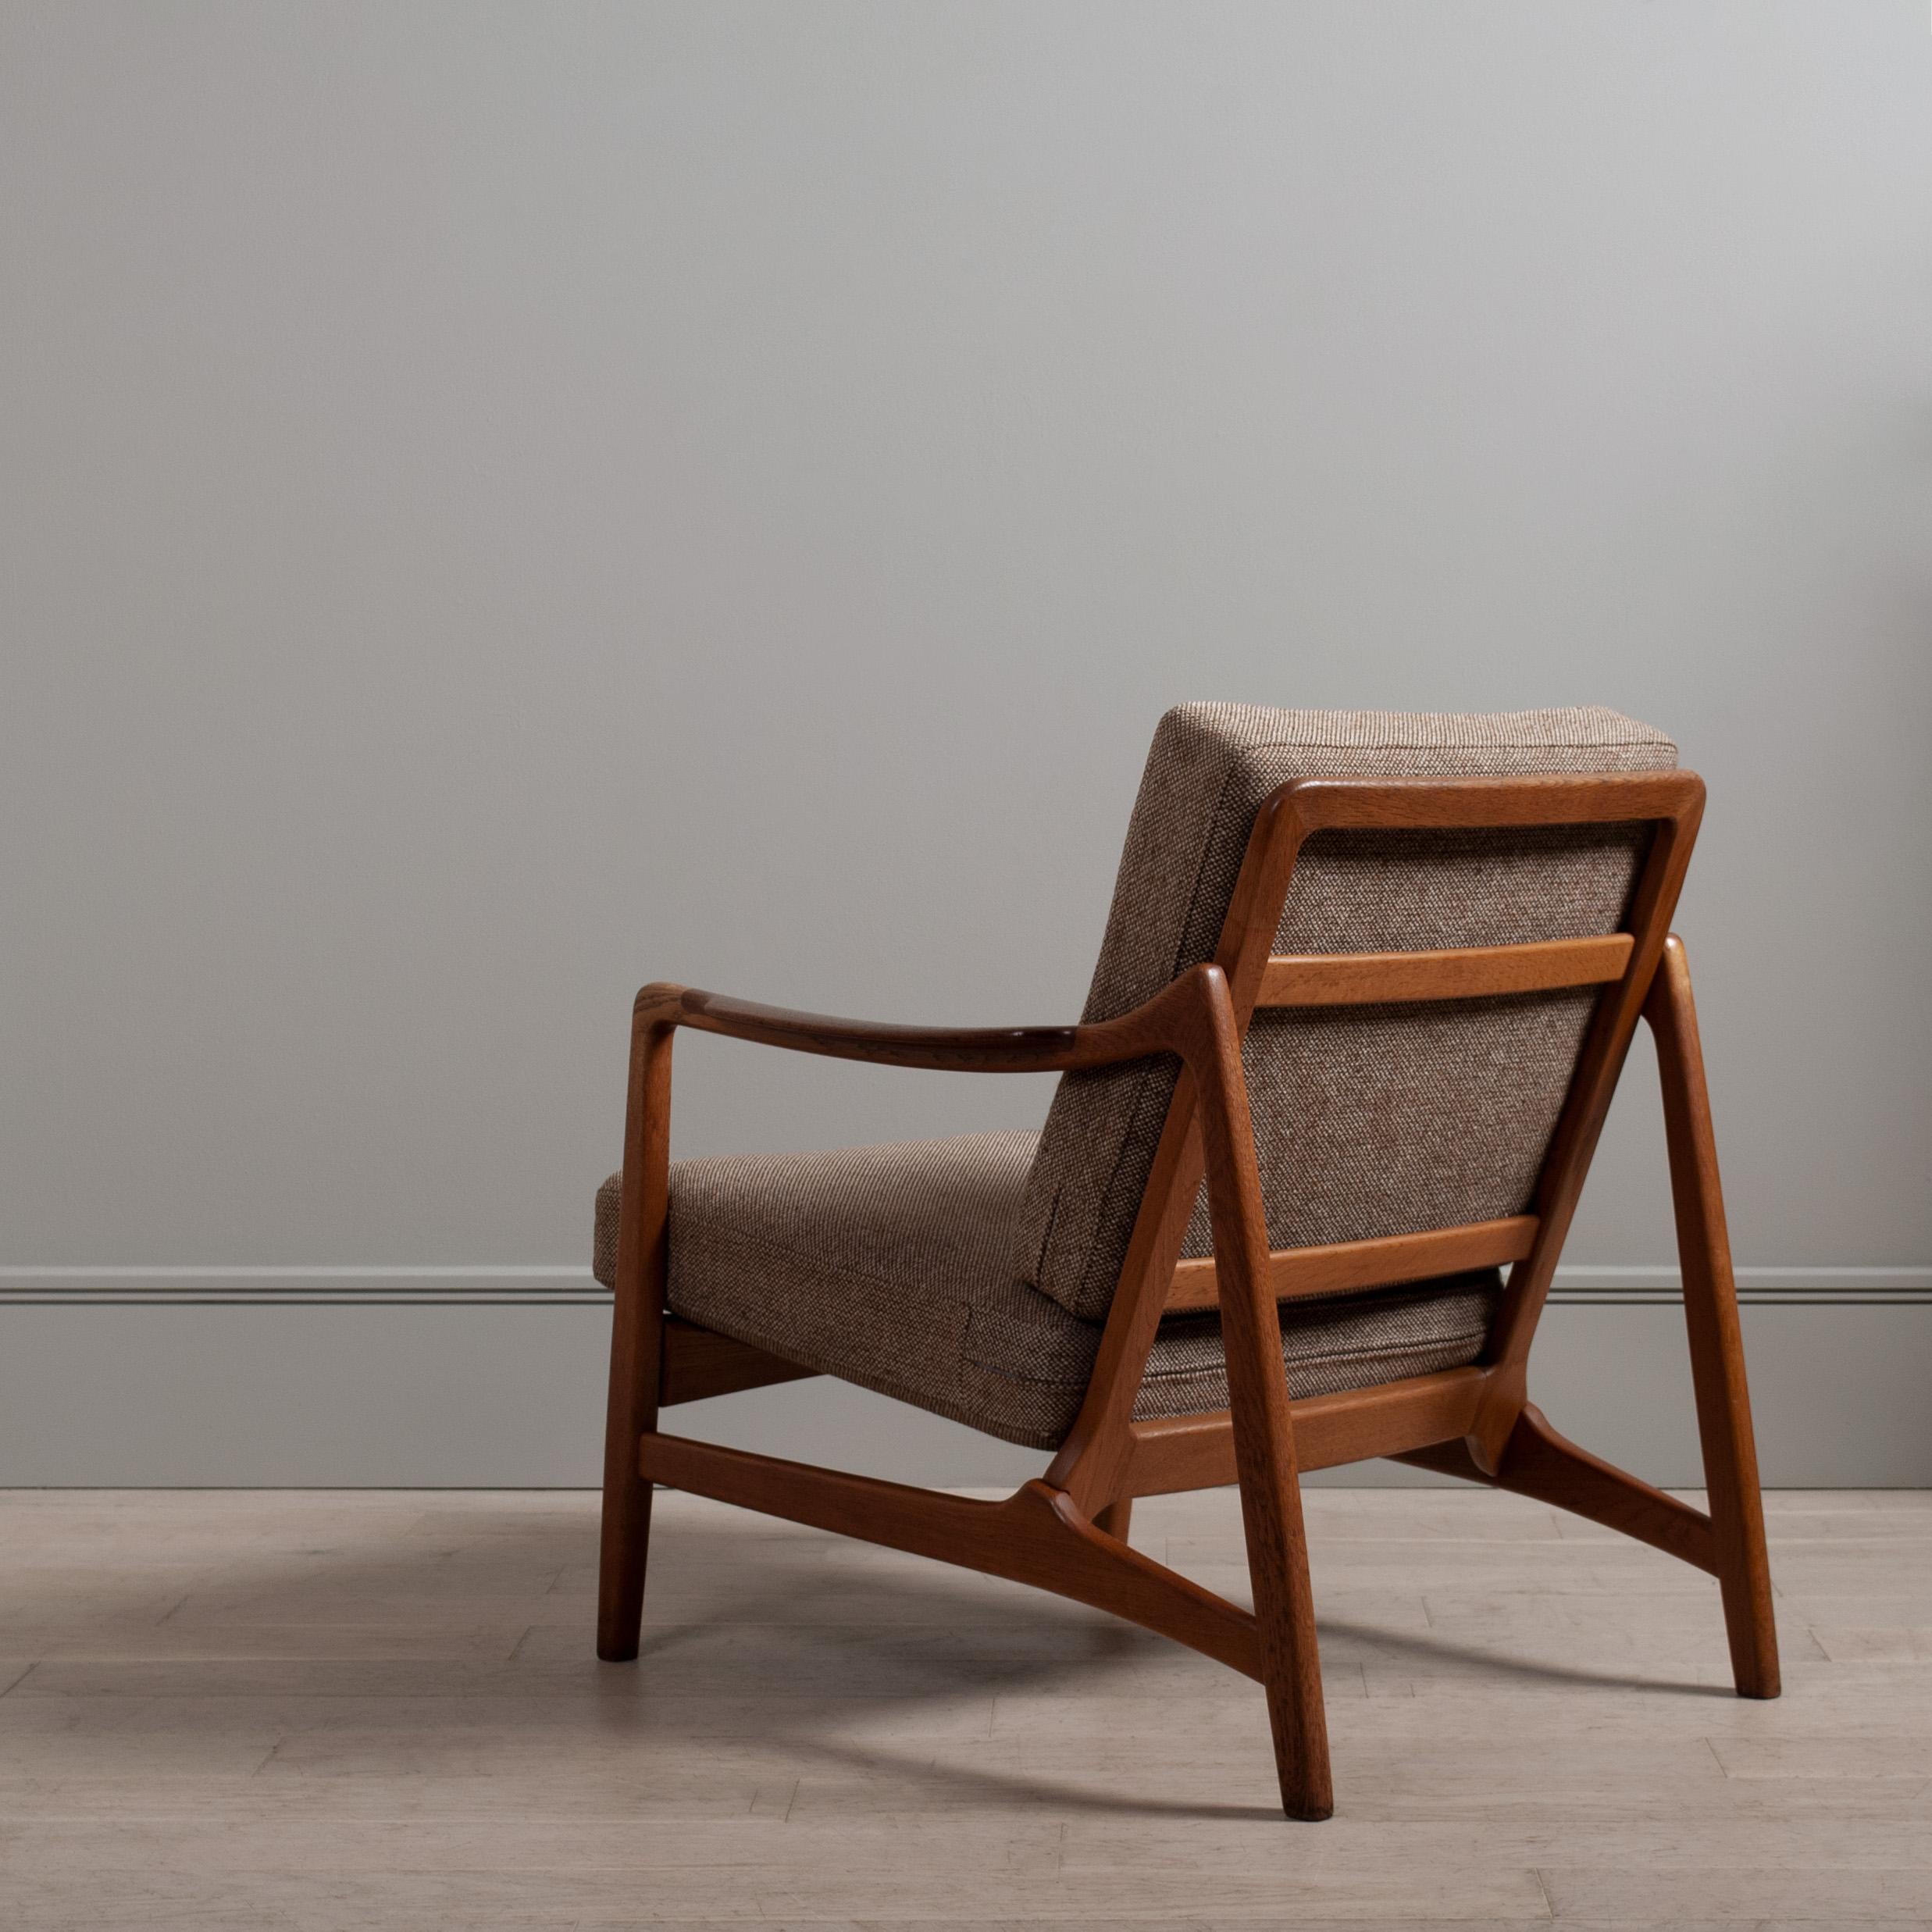 Modernist Oak Lounge Chair, Tove & Edvard Kindt Larsen In Good Condition For Sale In London, GB